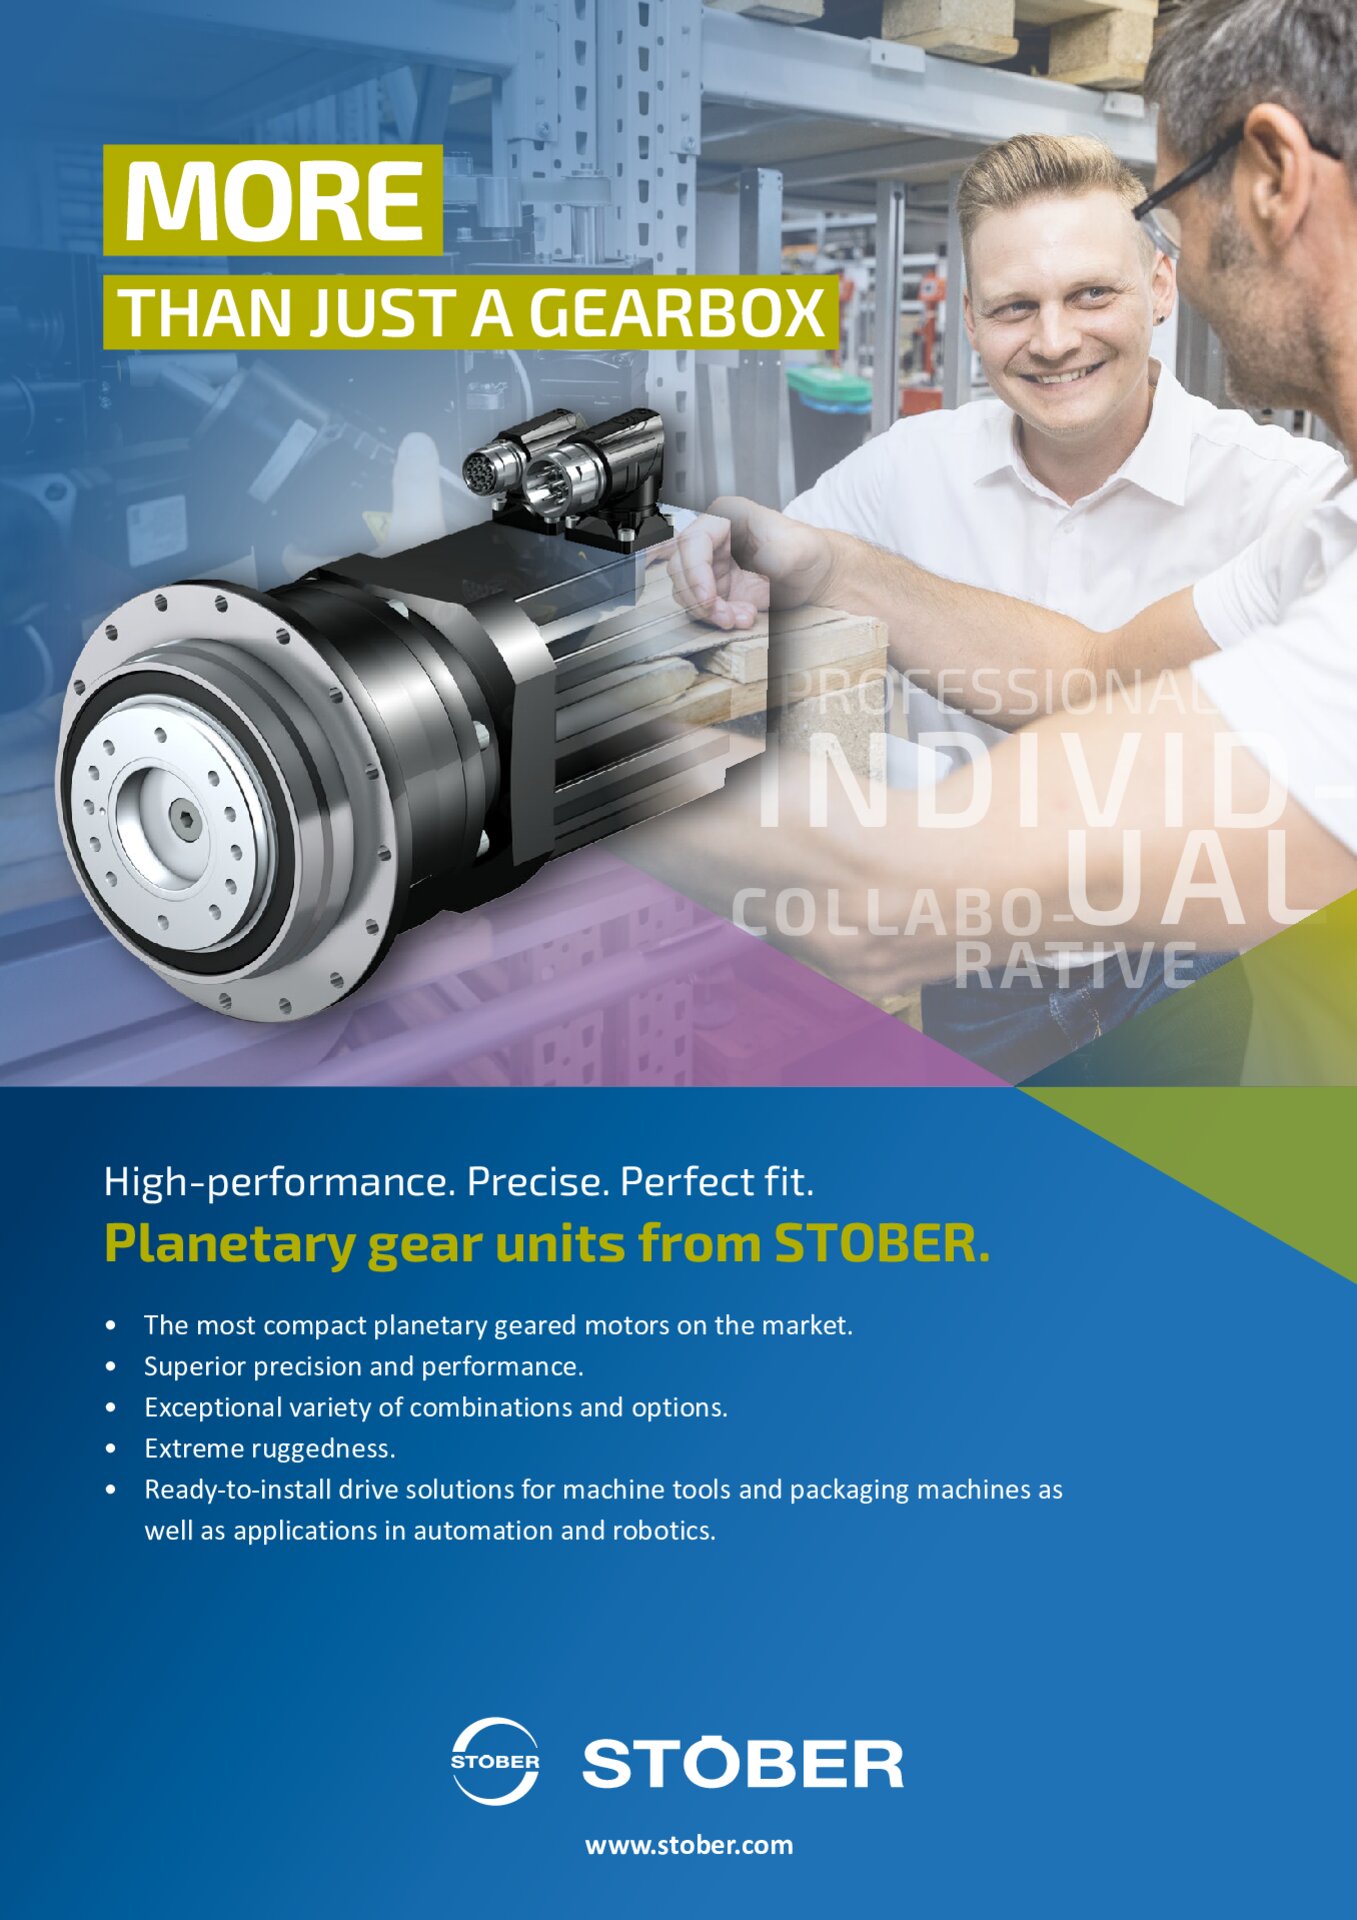 More than just a gearbox (new generation planetary gear units)